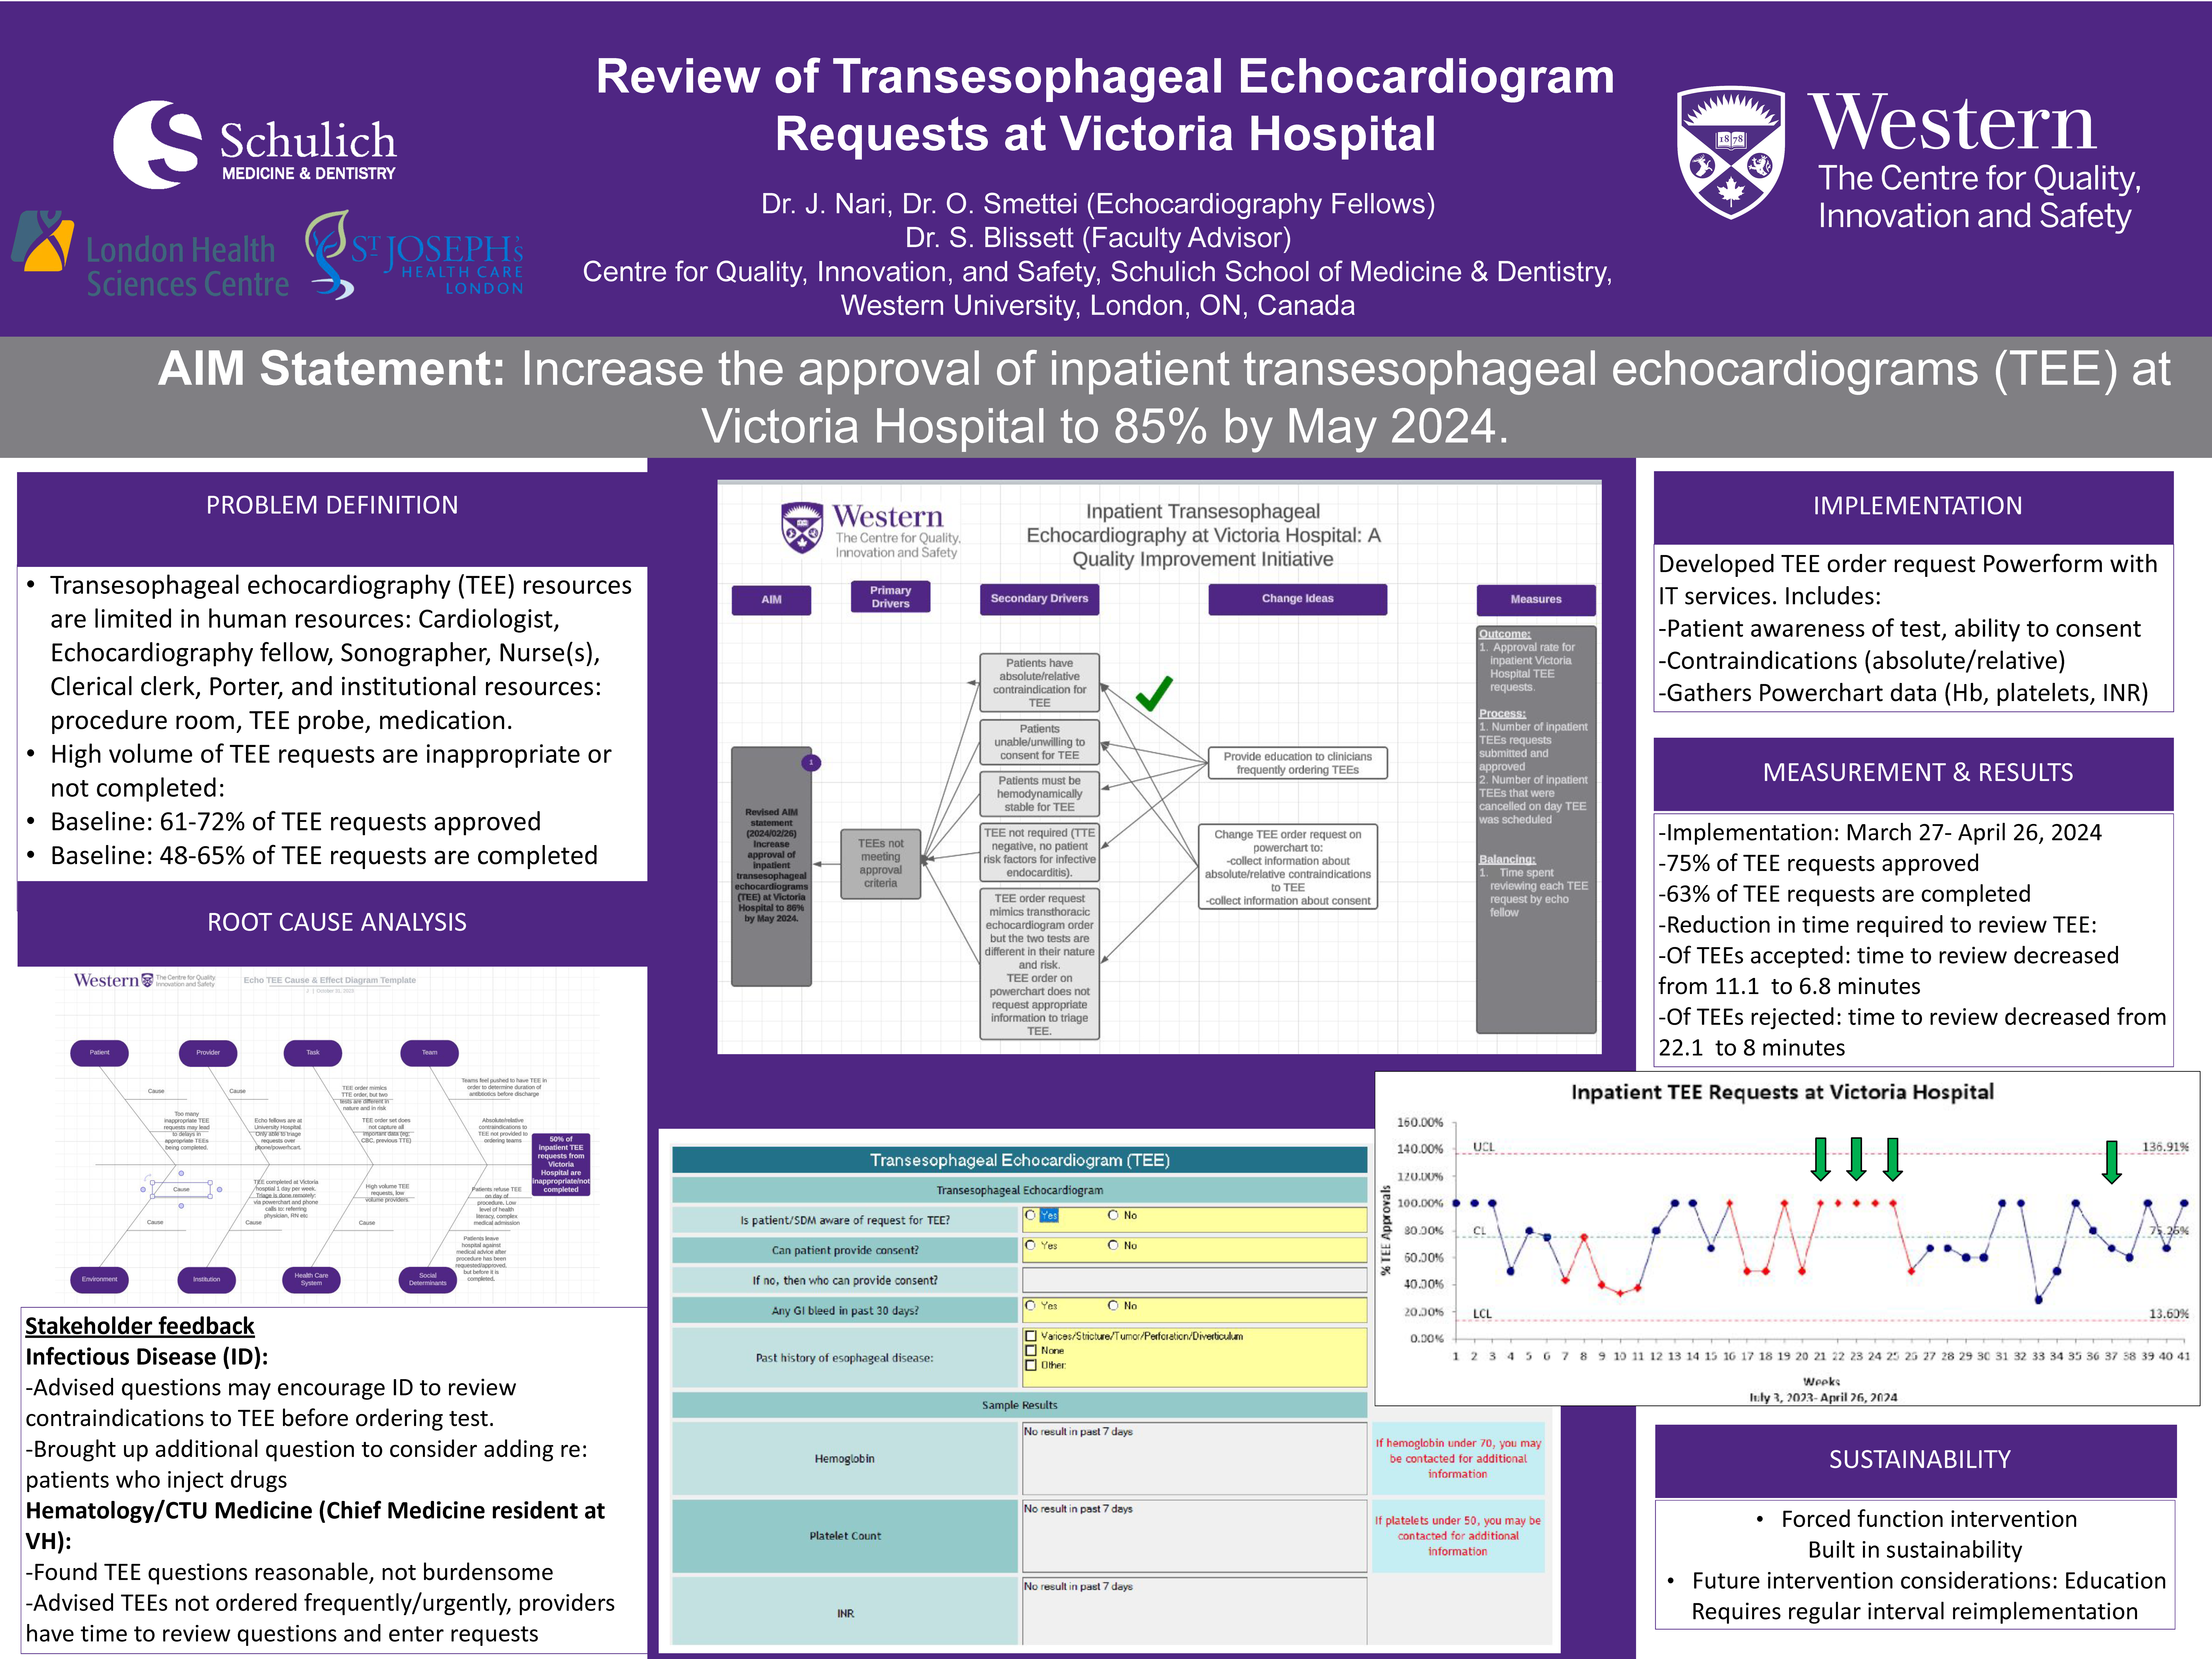 BISQ_2023-2024_Review of Transesophageal Echocardiogram Requests at Victoria Hospital_Poster.png